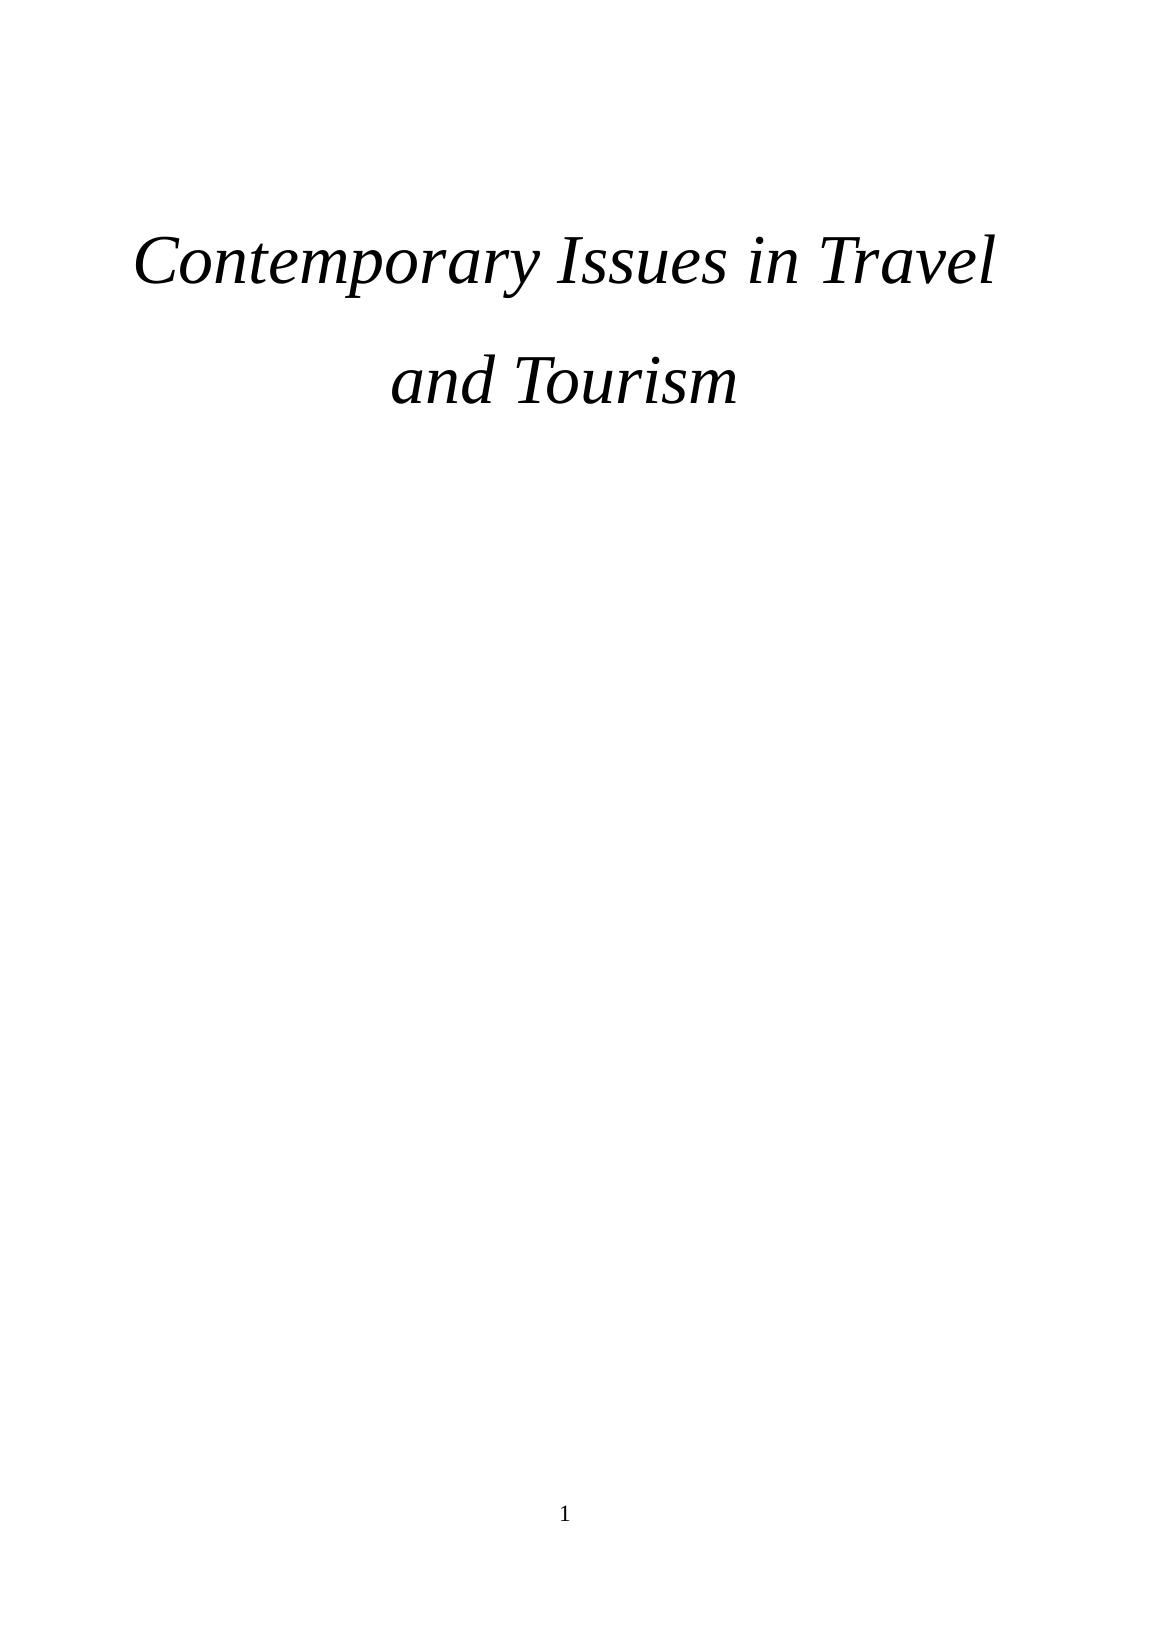 Contemporary Issues in Travel and Tourism -  Thomson Company_1